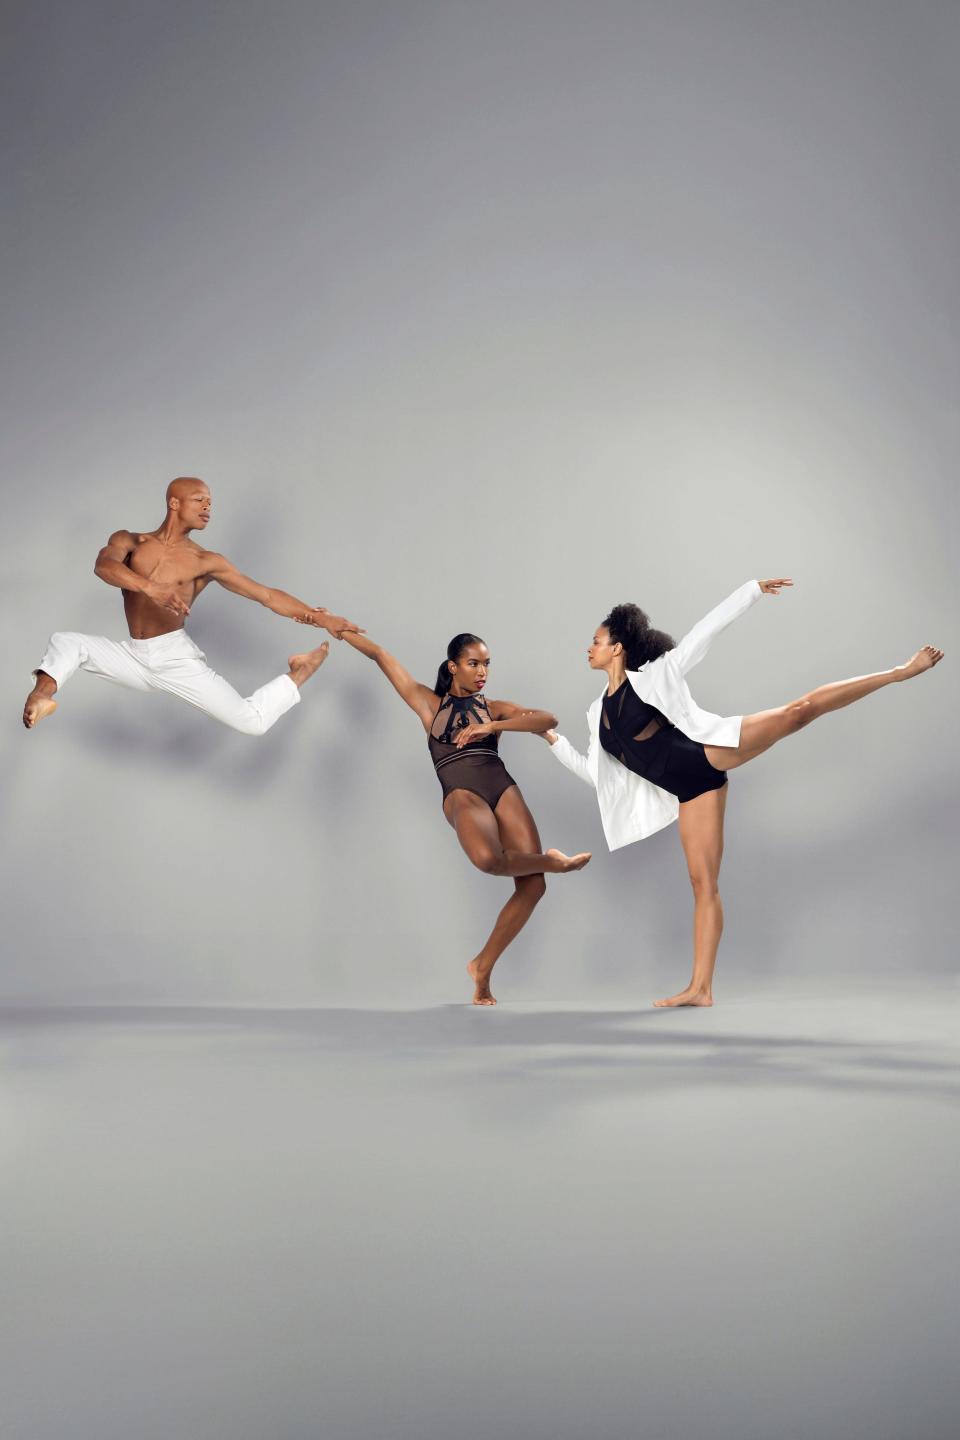 Patrick Gamble, Tamia Strickland and Kali Marie Oliver appear in a promotional image for the dance ensemble Ailey II.